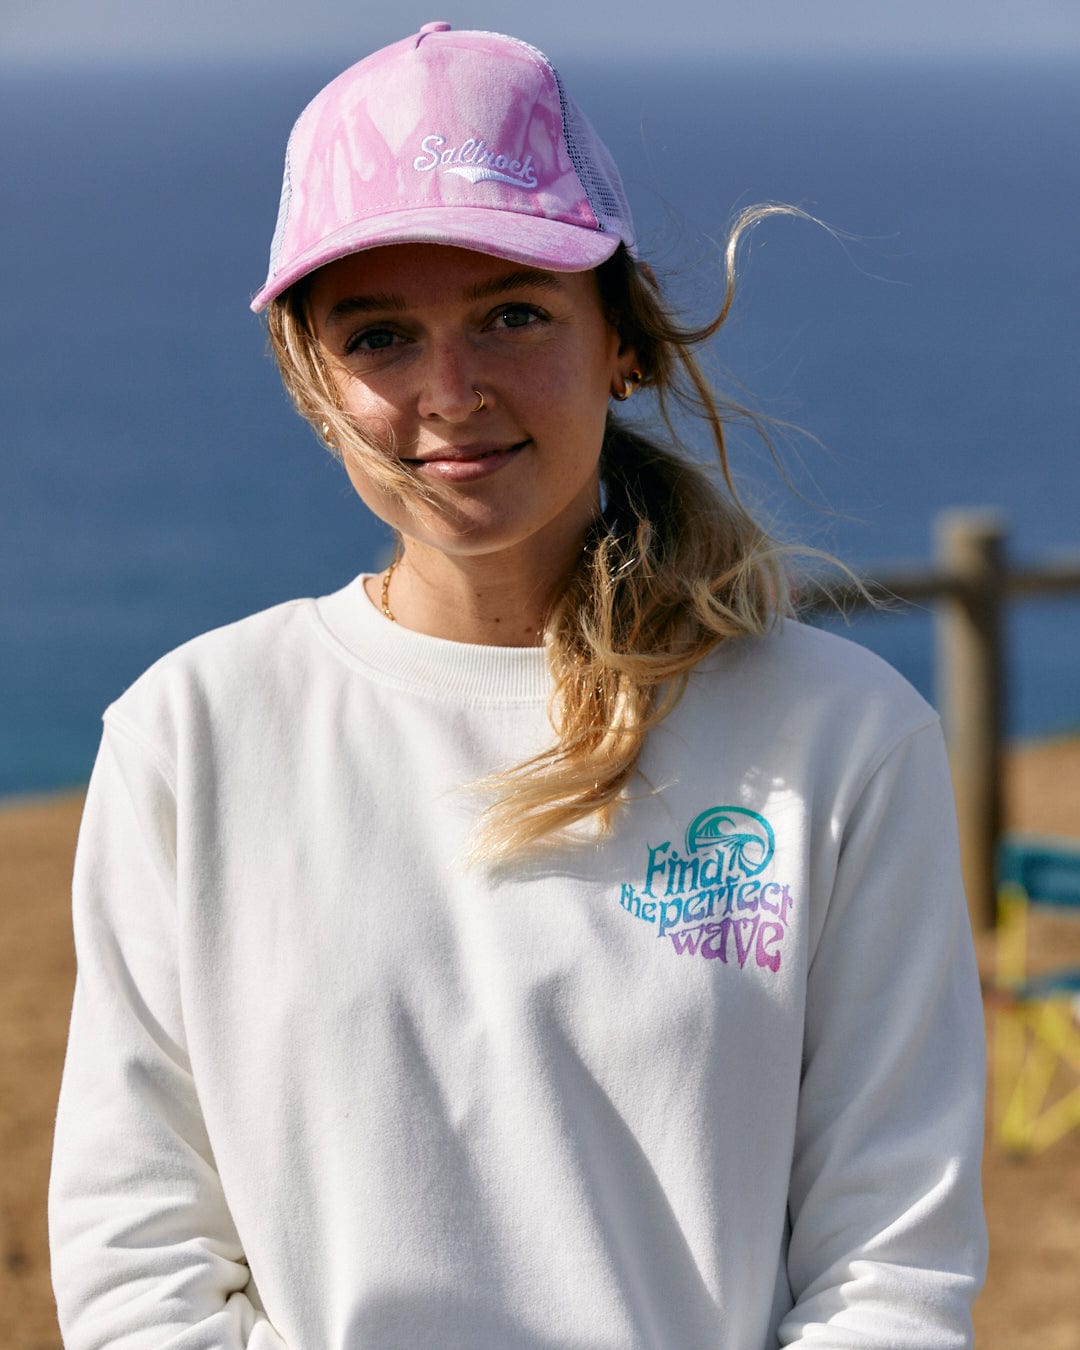 A woman wearing a Saltrock Find The Perfect Wave - Womens Sweat - White with a multi-coloured slogan and a pink hat.